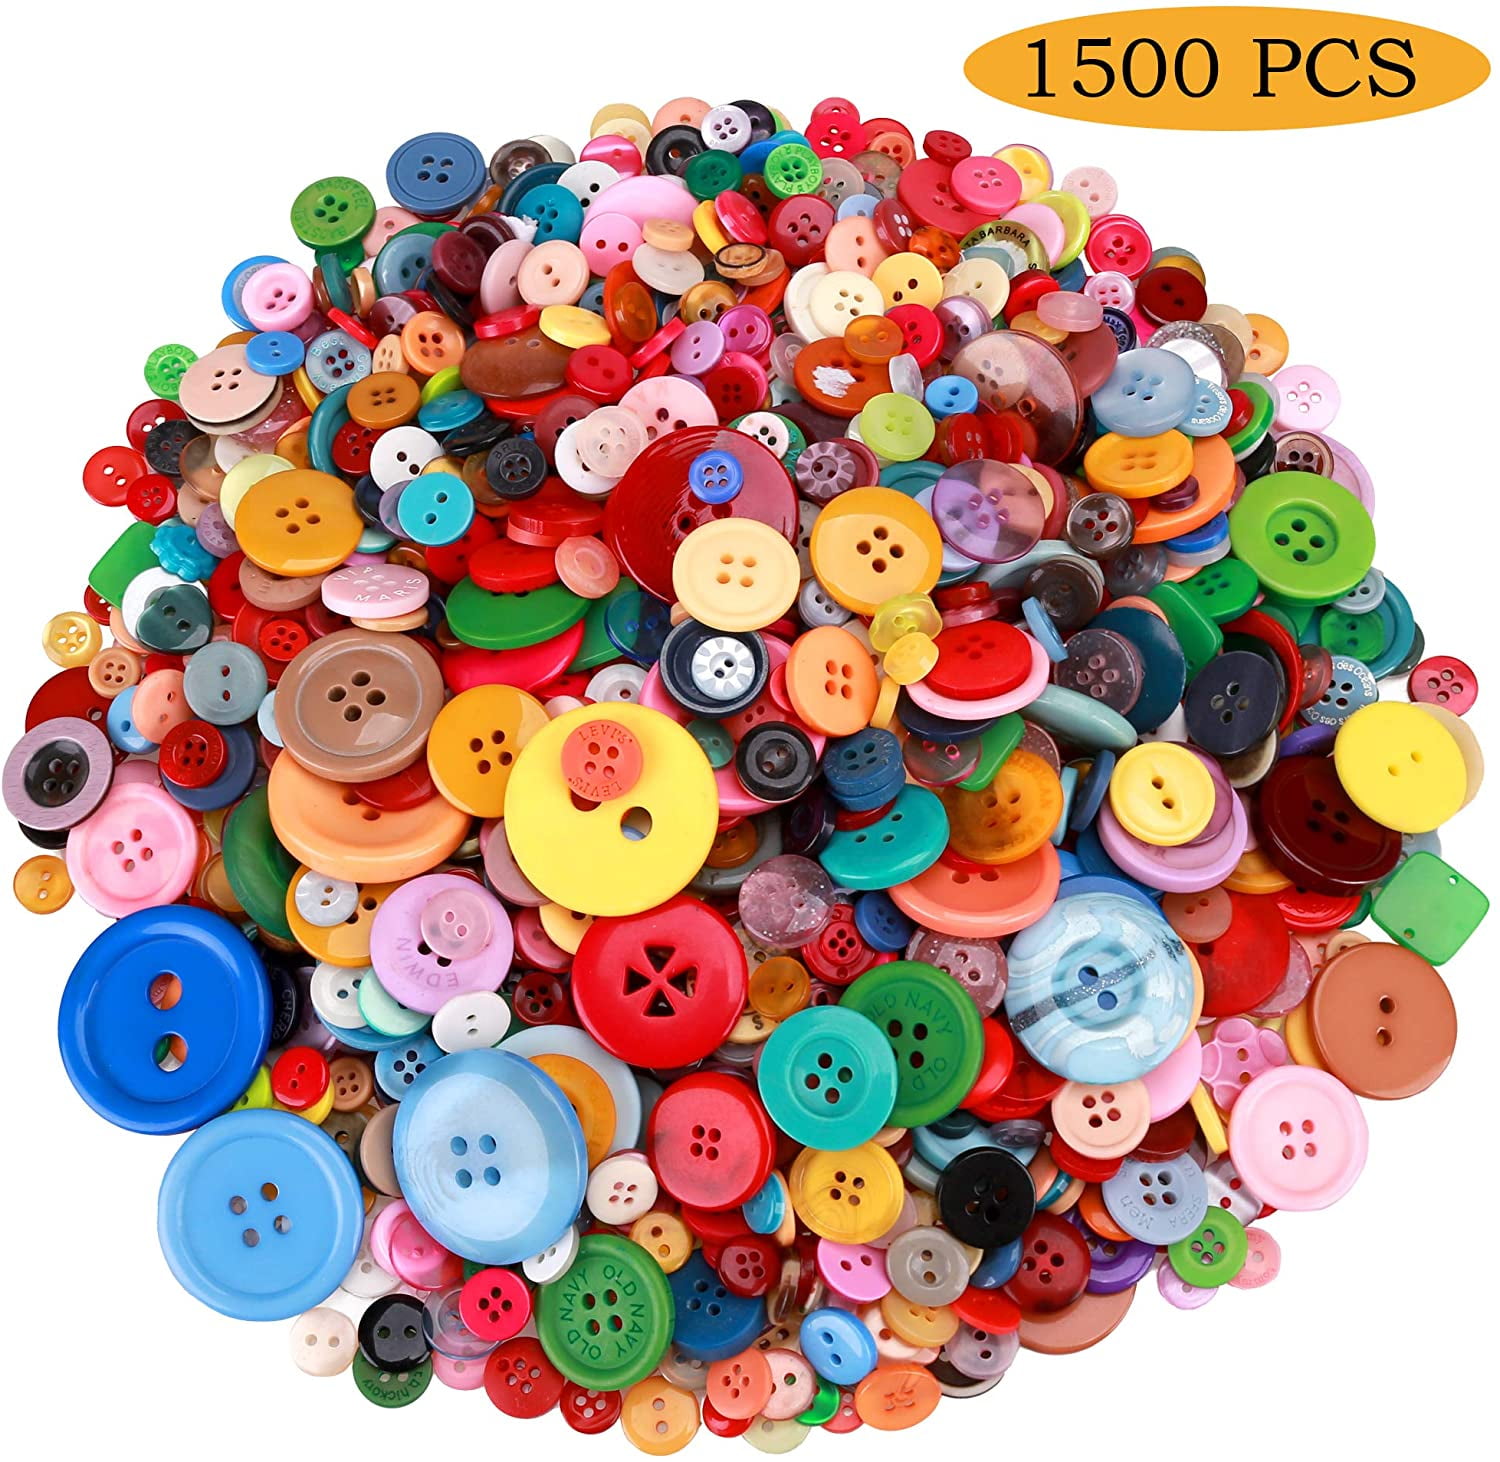 100 Pcs Mix Assorted Buttons for Sewing Crafts Accessories, Flower Buttons,  Shank, Animals, Heart, Girl, Boy 